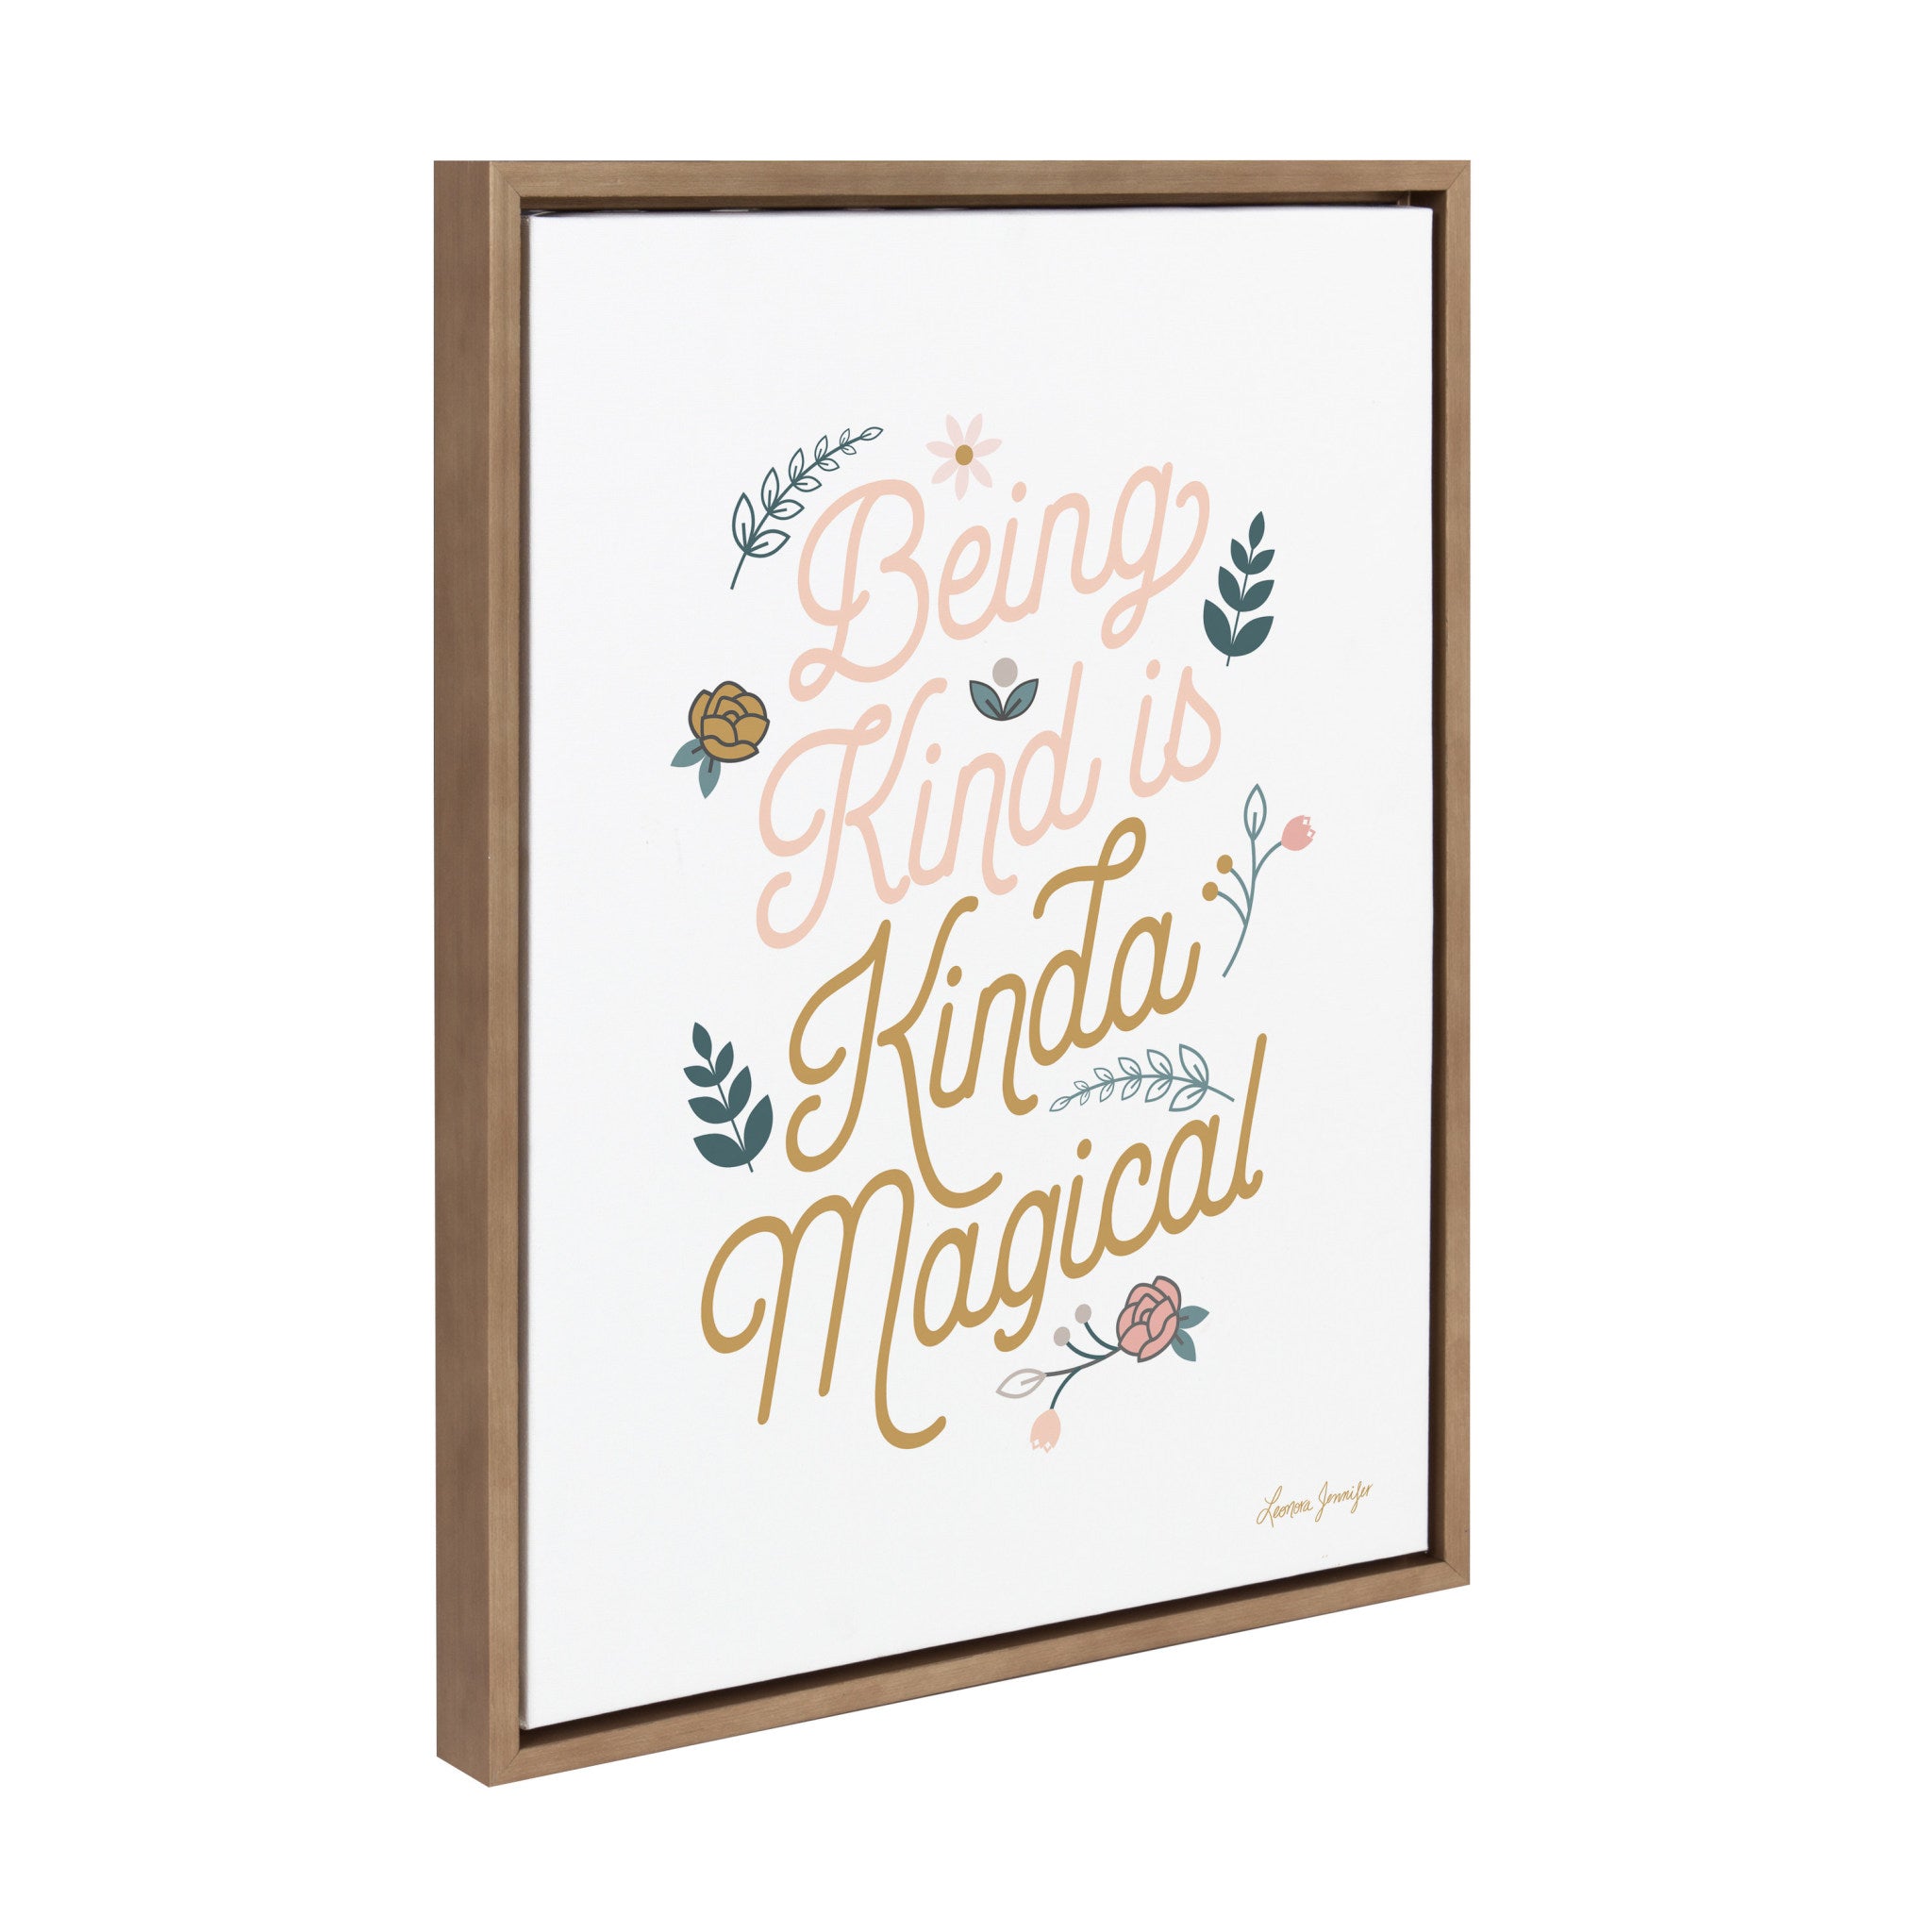 Sylvie Being Kind is Kinda Magical v2 Framed Canvas by Yellow Heart Art